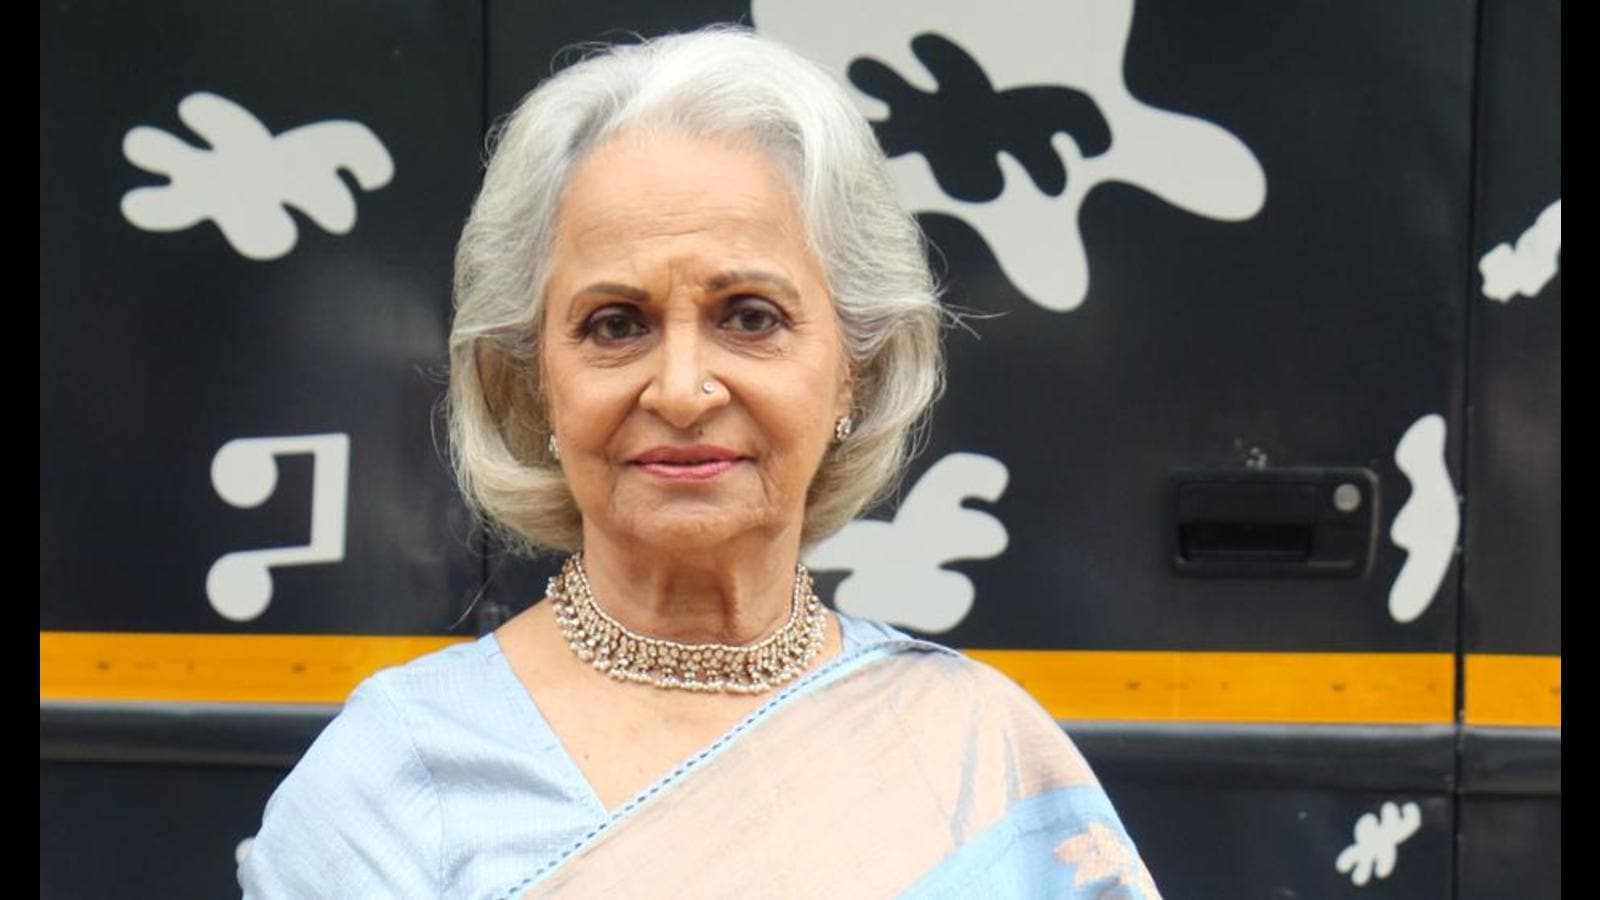 I took up photography early, but stopped after marriage: Waheeda ...